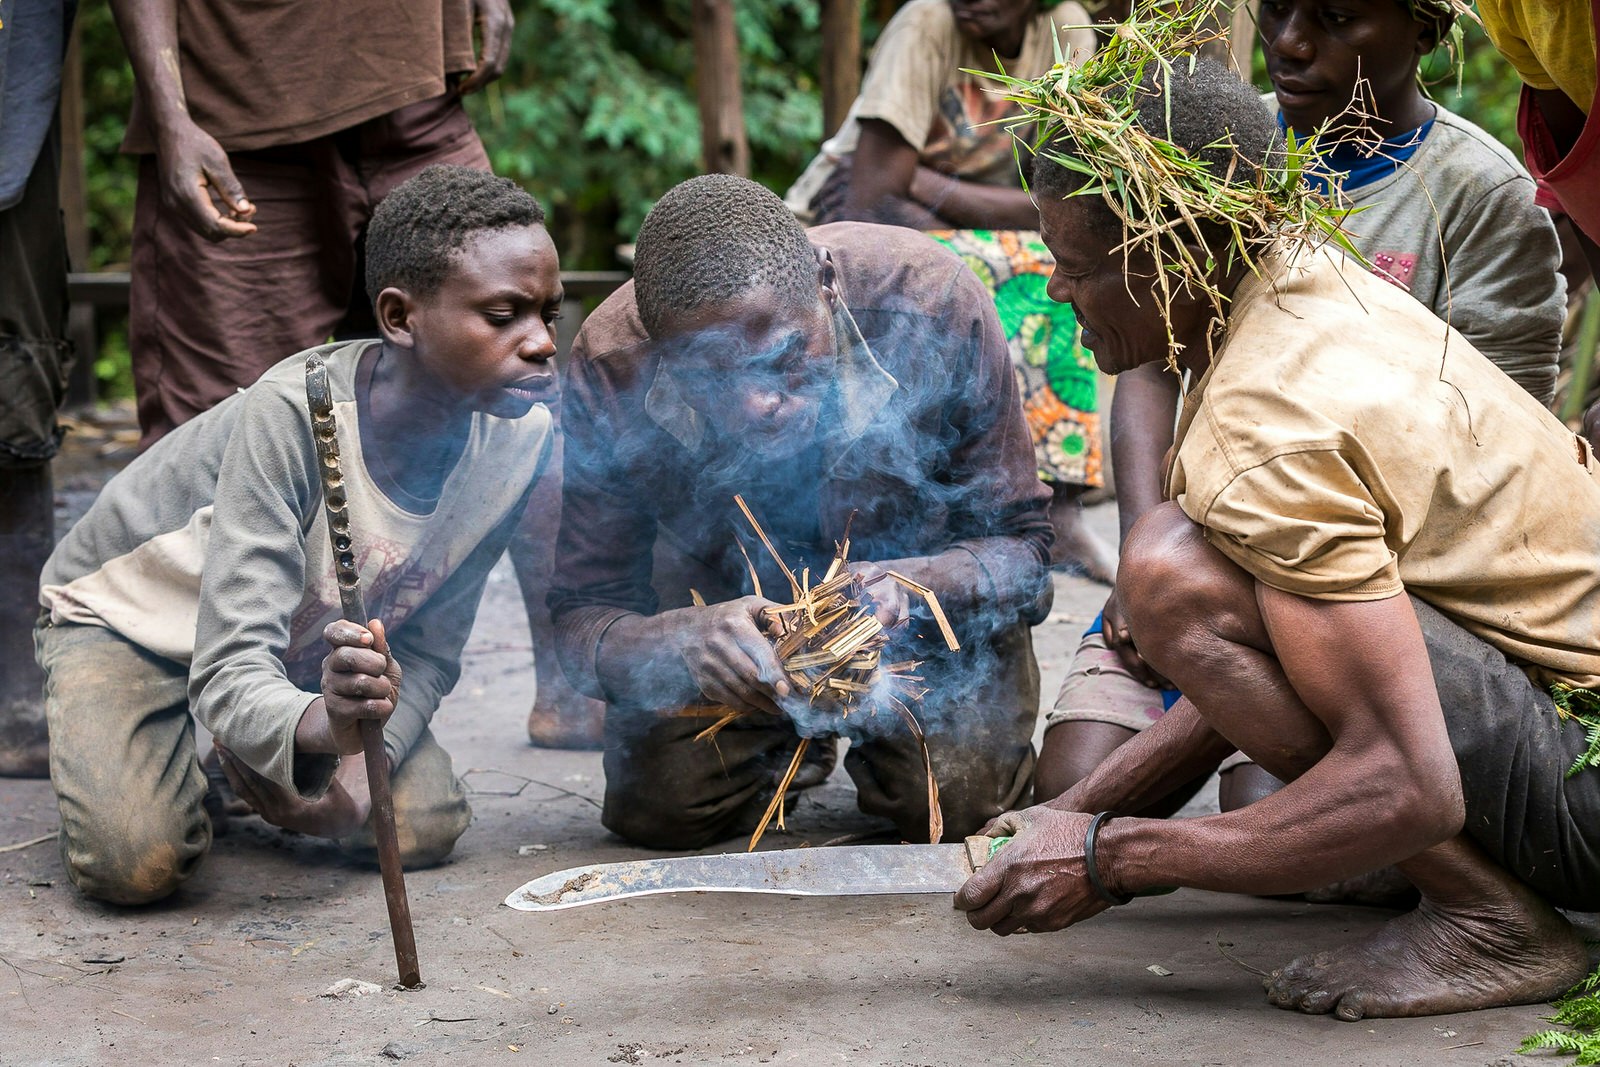 A kneeling Batwa man blows on a collection of dry grass in his hands that smokes; to his left is a boy holding the stick that was used to create the initial spark by spinning.